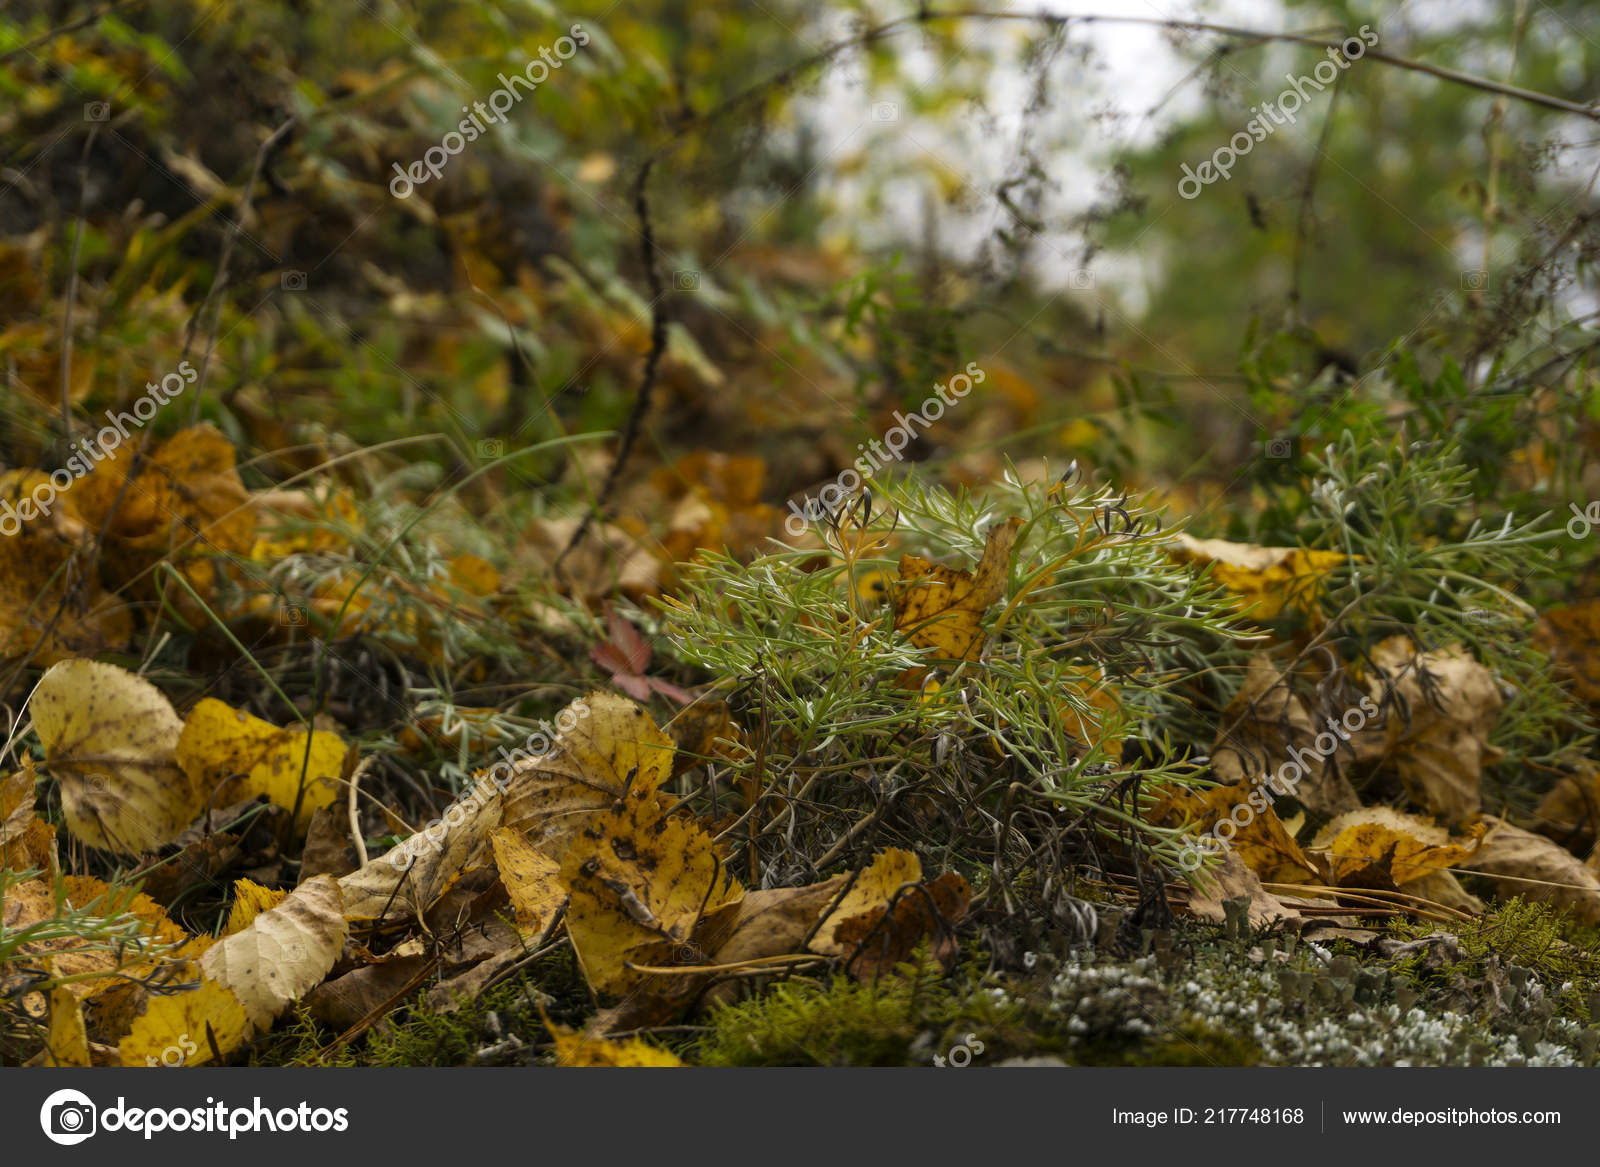 Blurred Forest Floor Autumn Forest Floor Moss Grass Fallen Yellow Leaves Close Blurred Stock Photo C Haritonoff